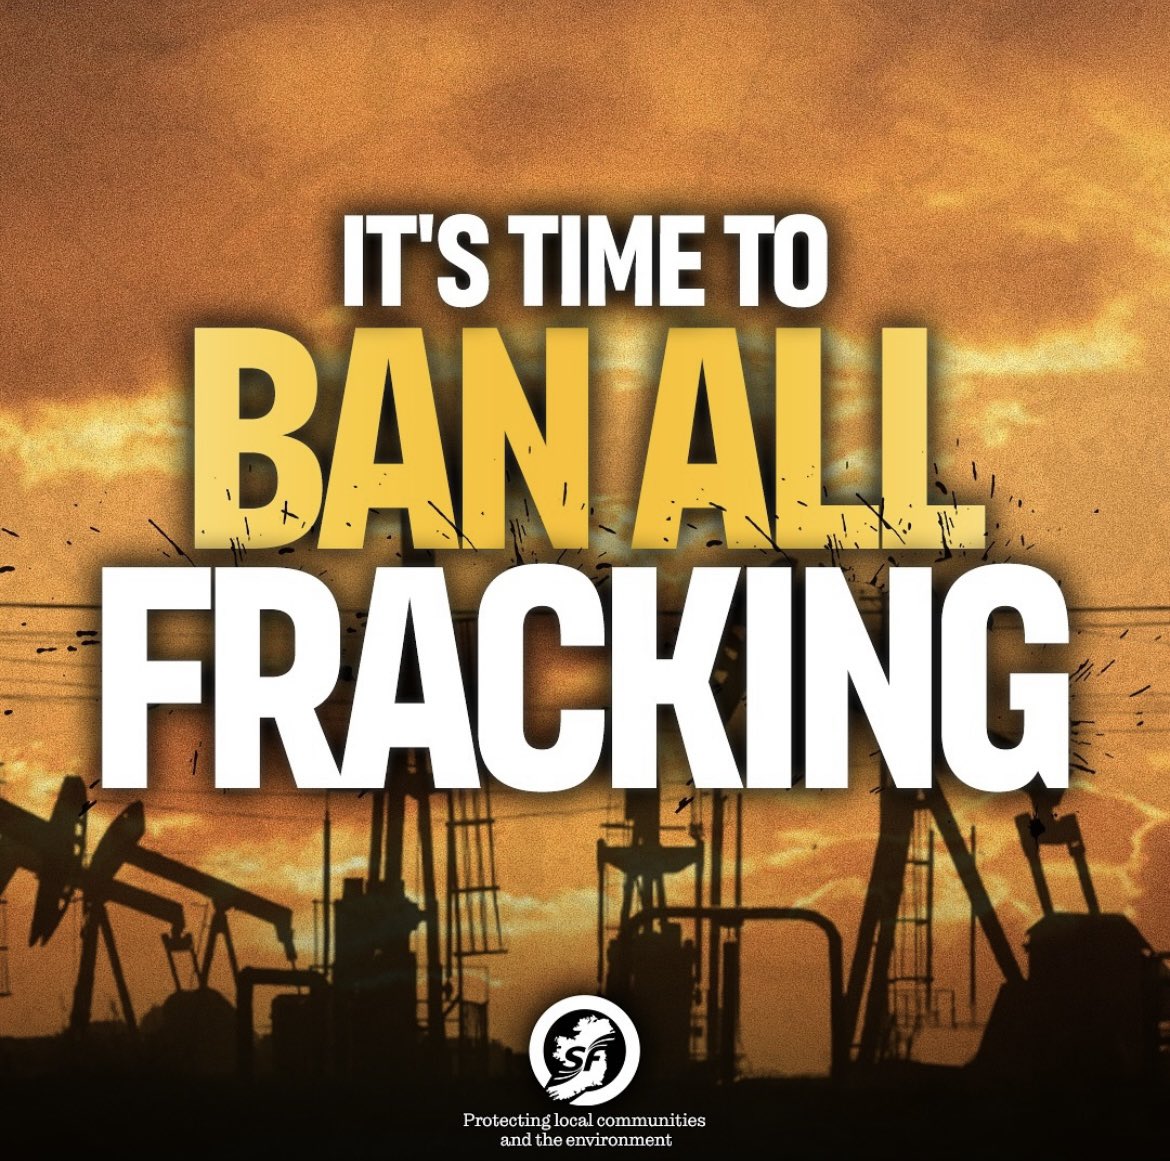 Sinn Féin is working to ban fracking & all forms of fossil fuel exploration. Economy Minister Conor Murphy has refused to grant any new licensing, & is drafting legislation to ban fracking & exploration. We will work with everyone to protect our environment #WorkingForAll